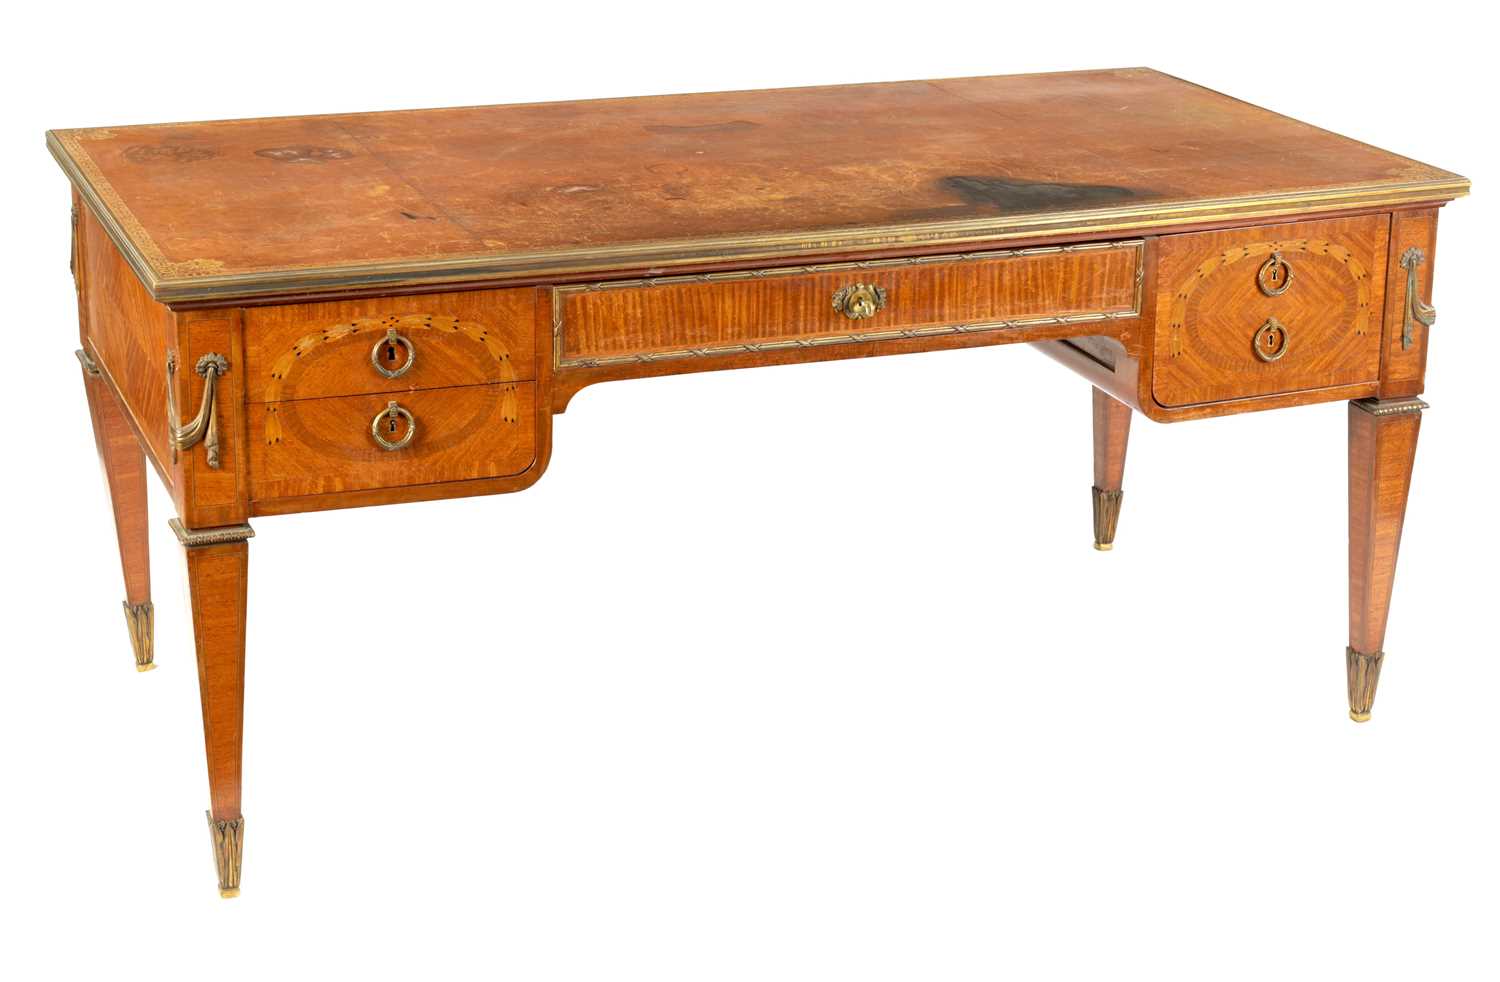 Lot 805 - A FINE LATE 19TH CENTURY FRENCH  ORMOLU MOUNTED INLAID SATINWOOD AND MAHOGANY DESK